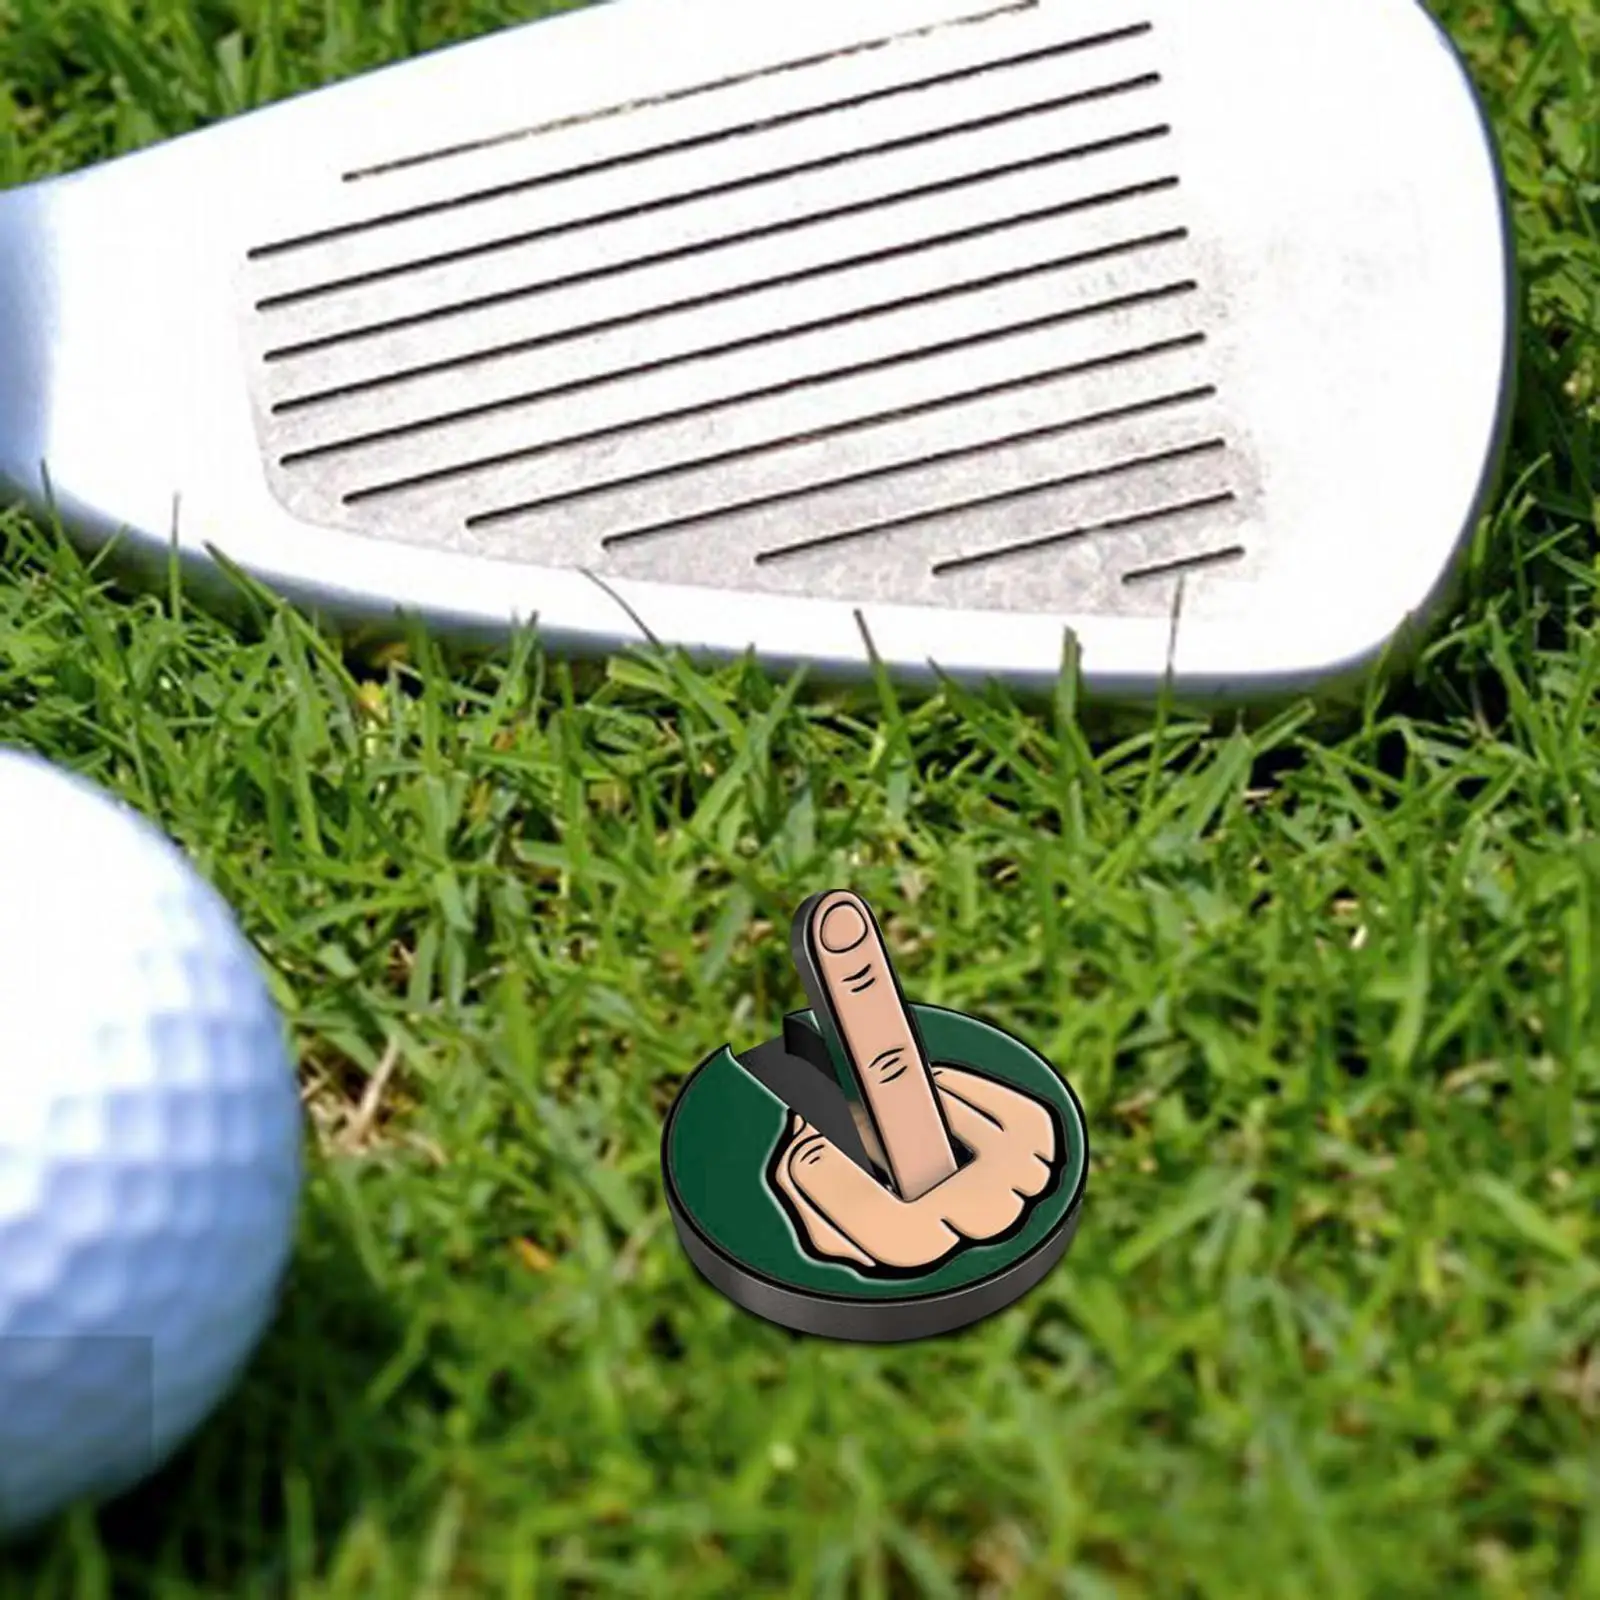 Funny Middle Finger Theme Golf Ball Marker Diameter 2.5cm Great Gift Iron Premiu